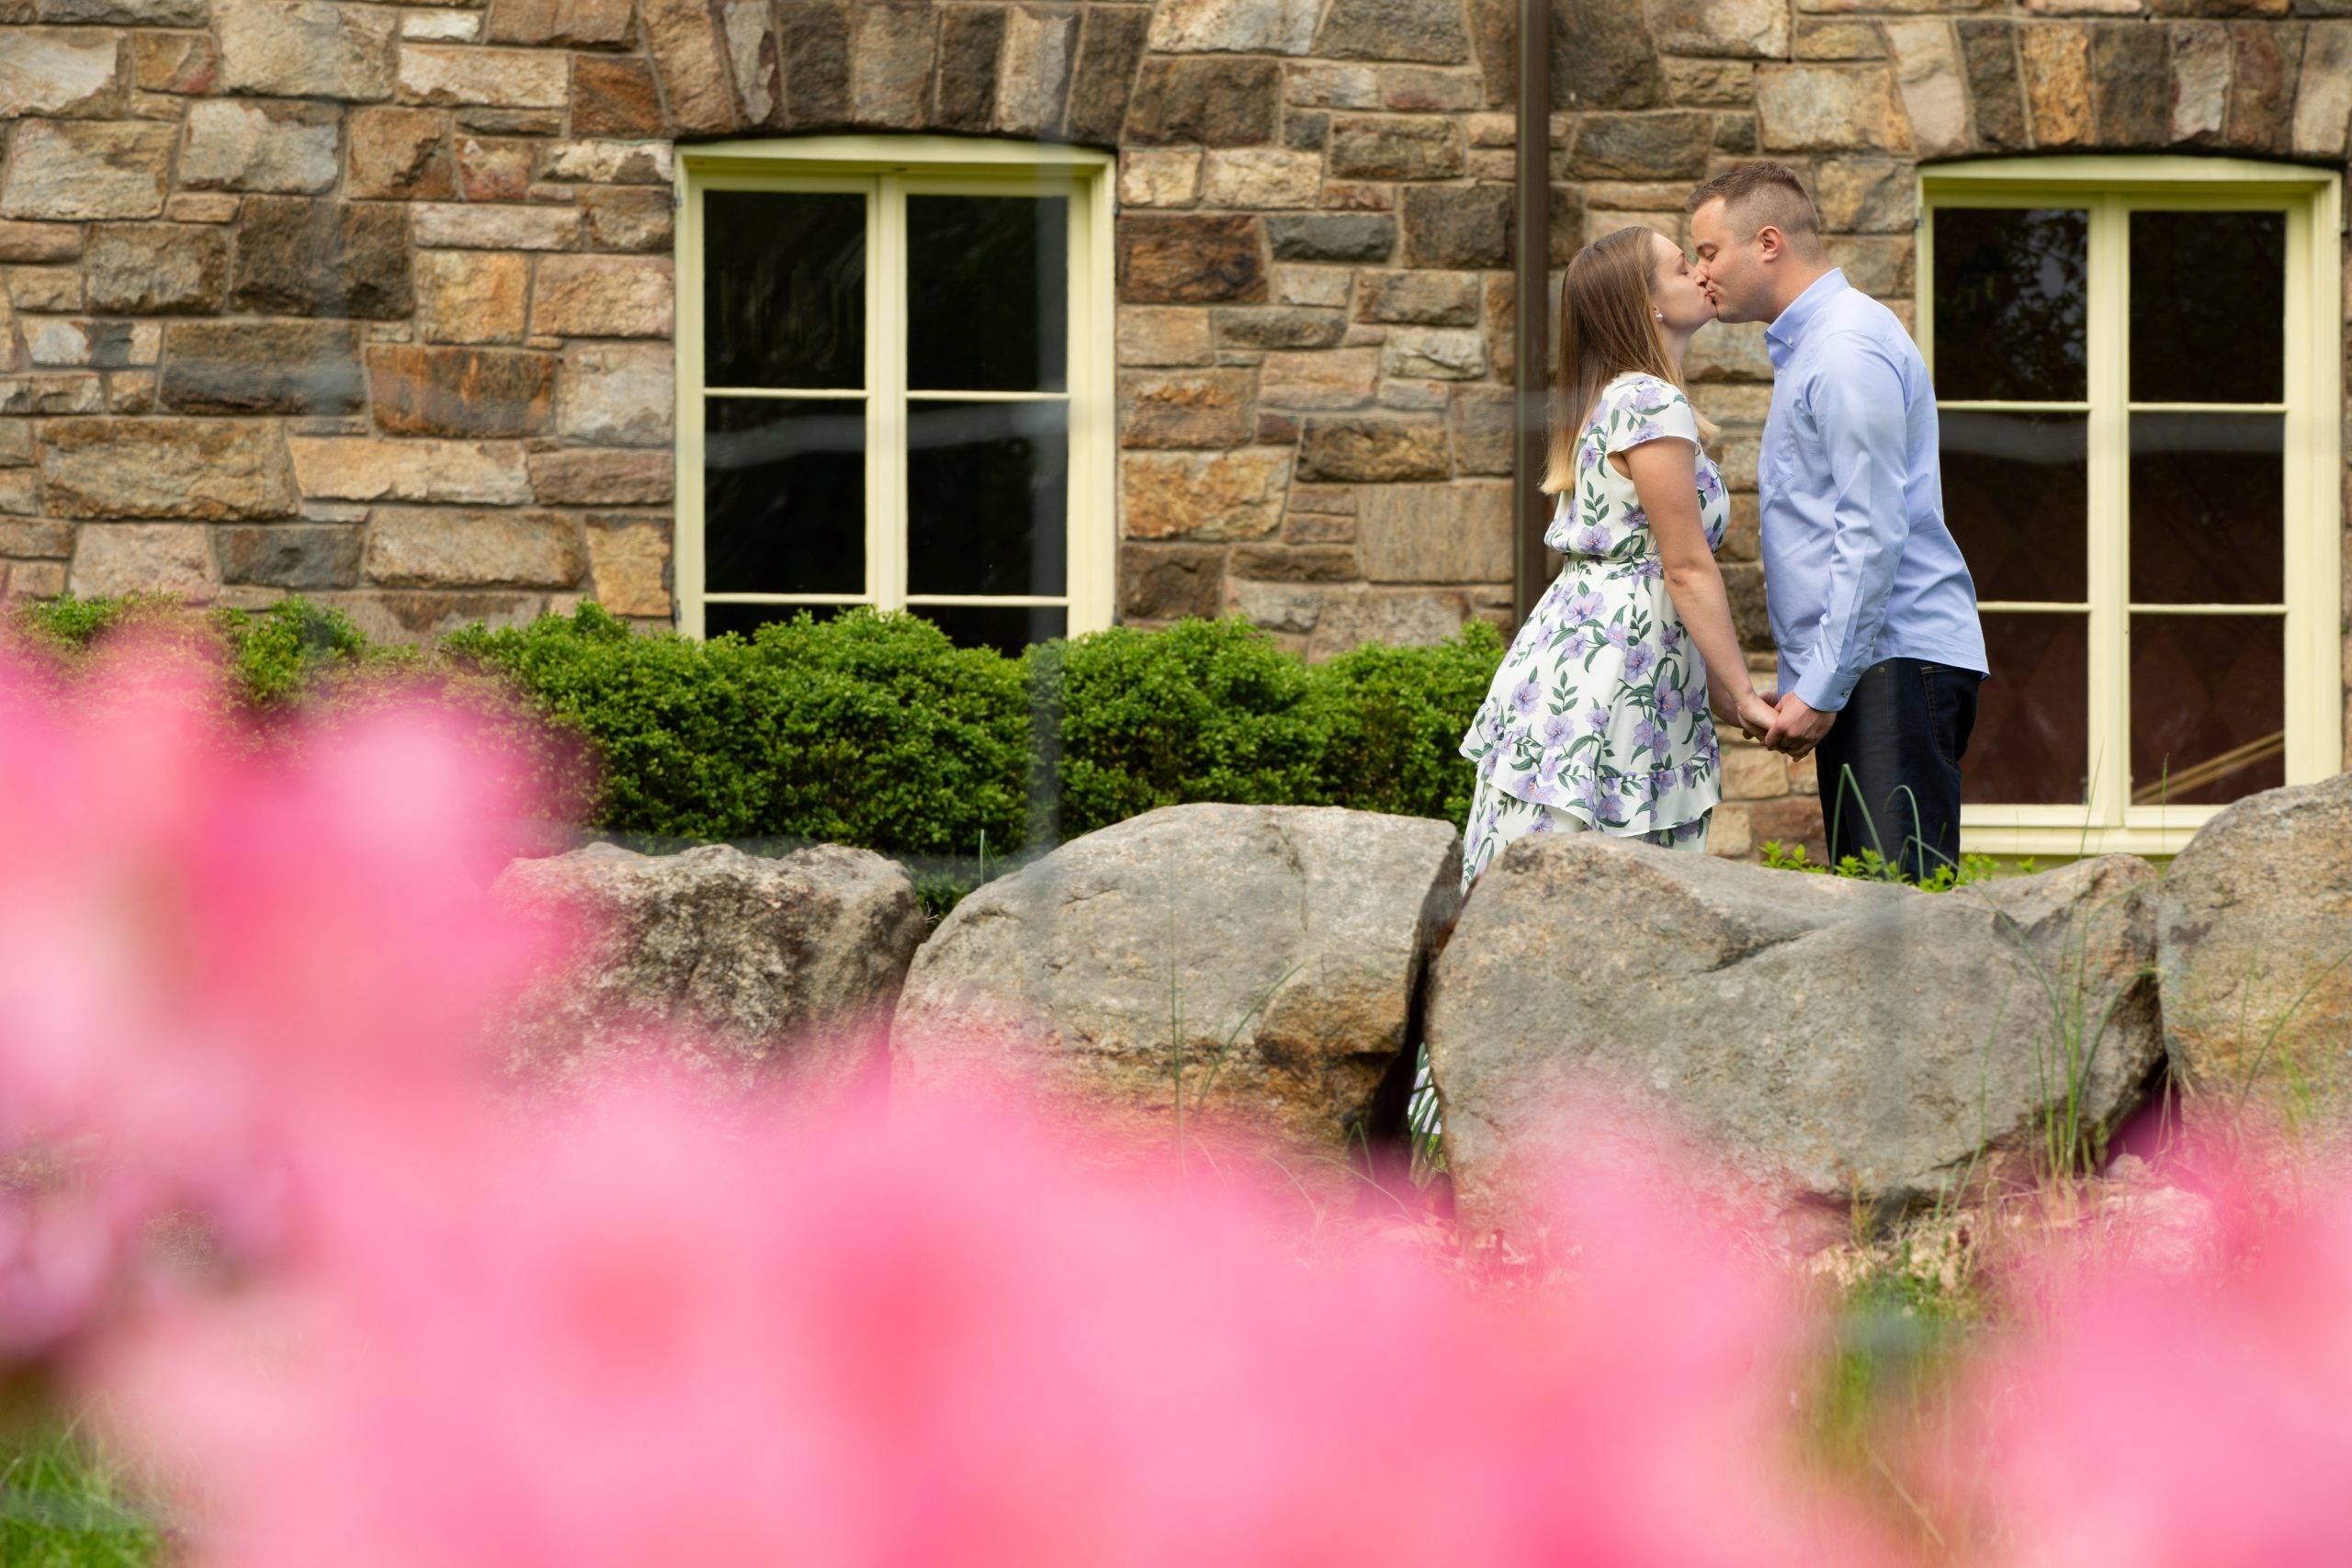 A couple kisses in front of a stone building with pink flowers.